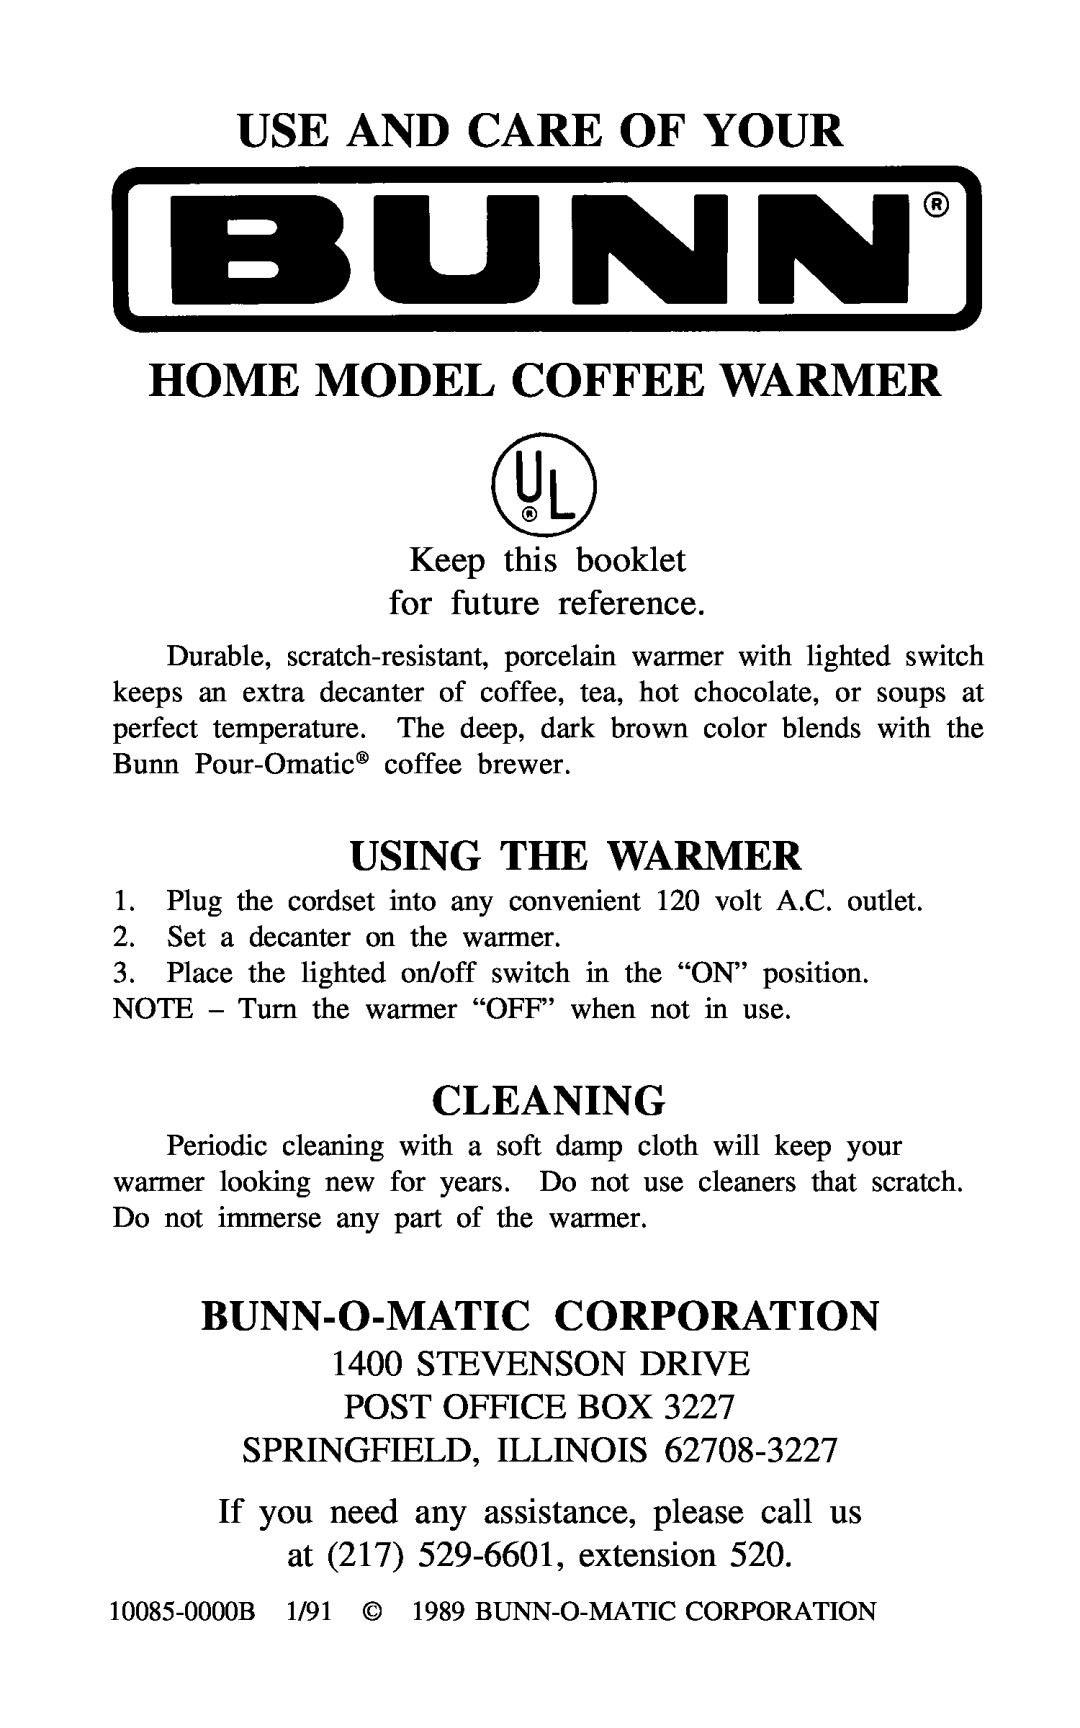 Bunn Coffee Warmer manual Using The Warmer, Cleaning, Bunn-O-Maticcorporation, Keep this booklet for future reference 